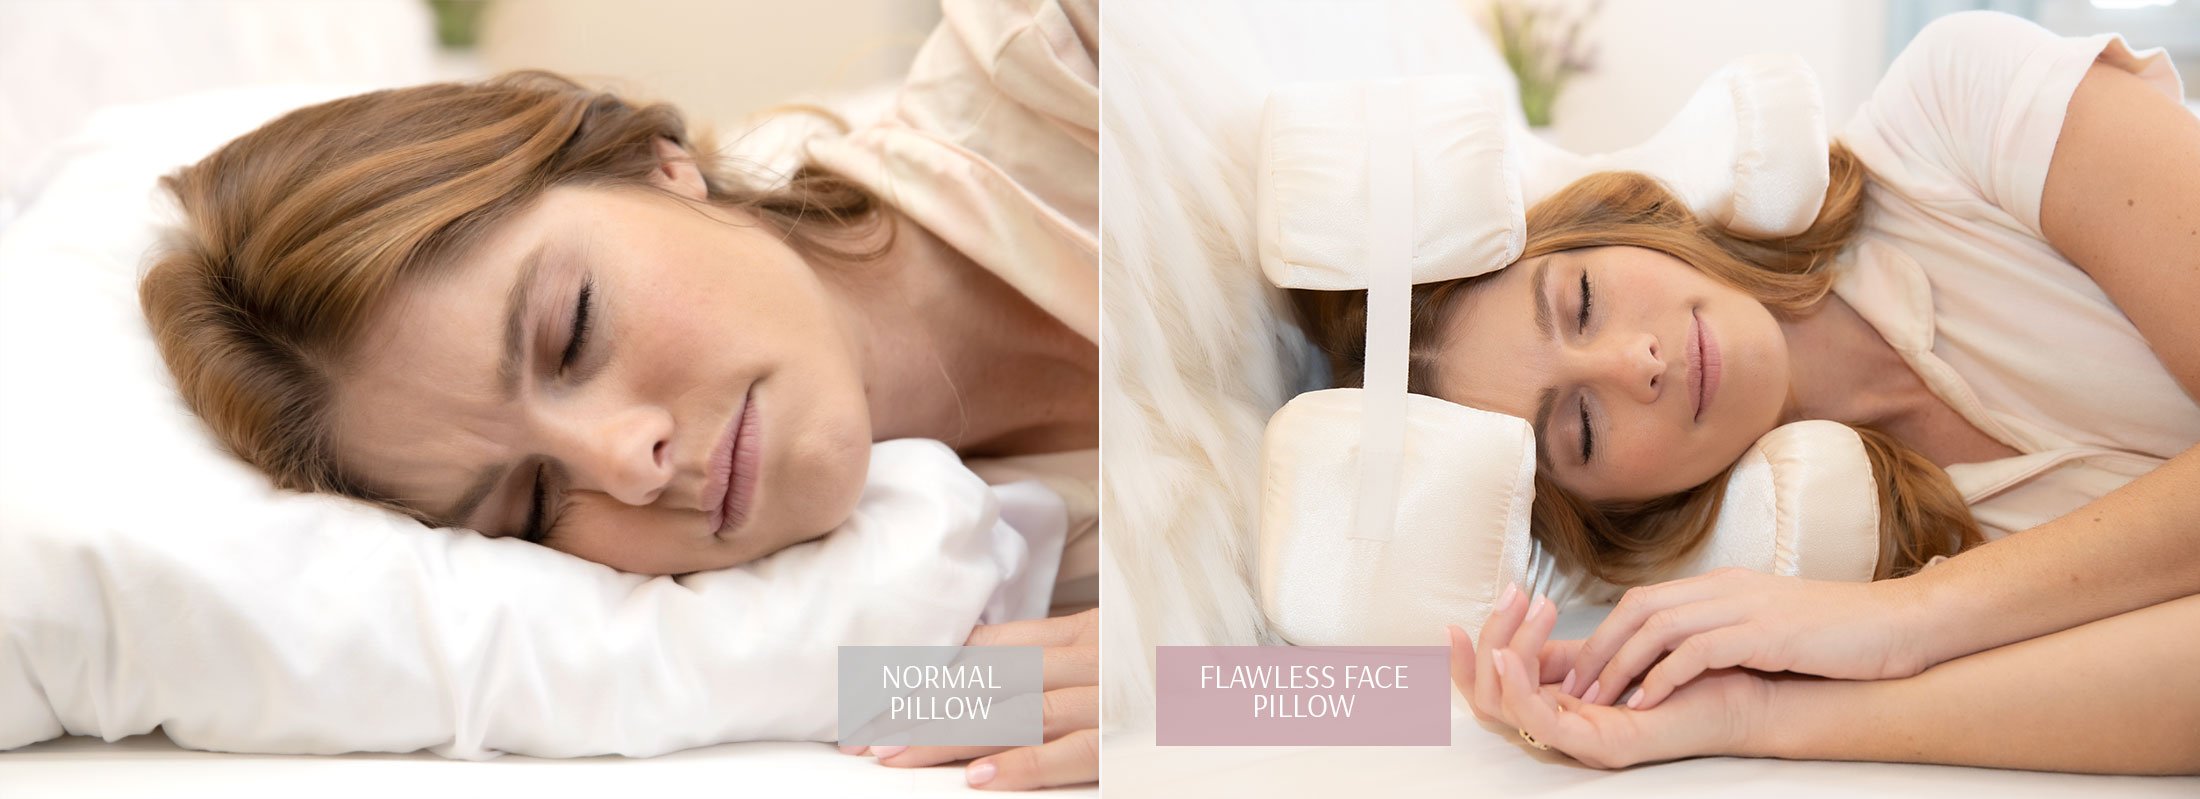 Best anti wrinkle / anti aging pillow on the market! – Flawless Face Pillow